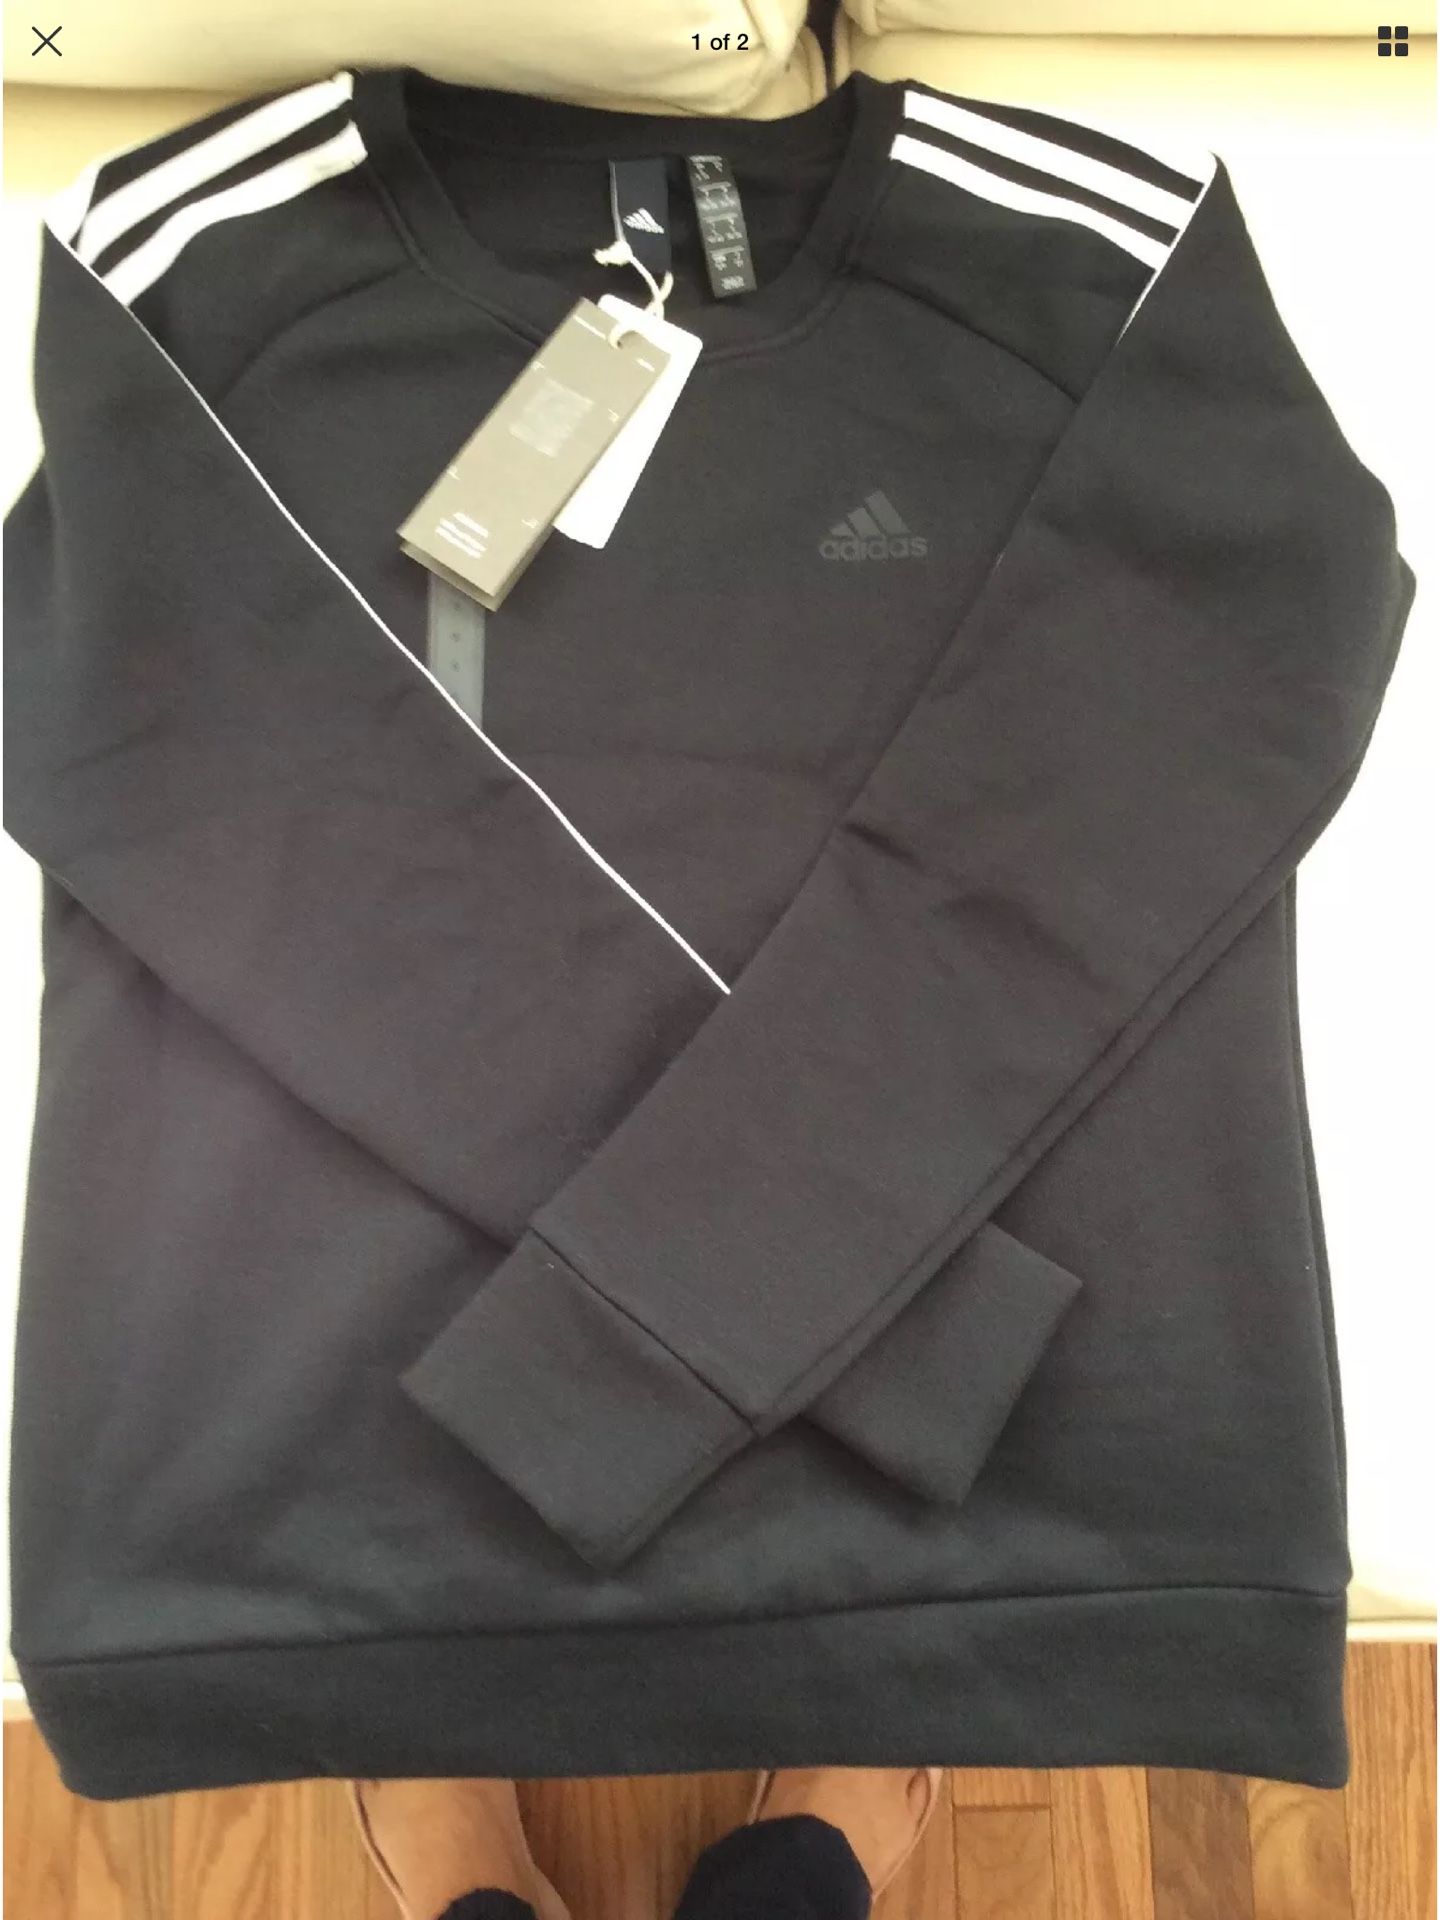 Adidas crew neck sweater new with tag. Women Size S